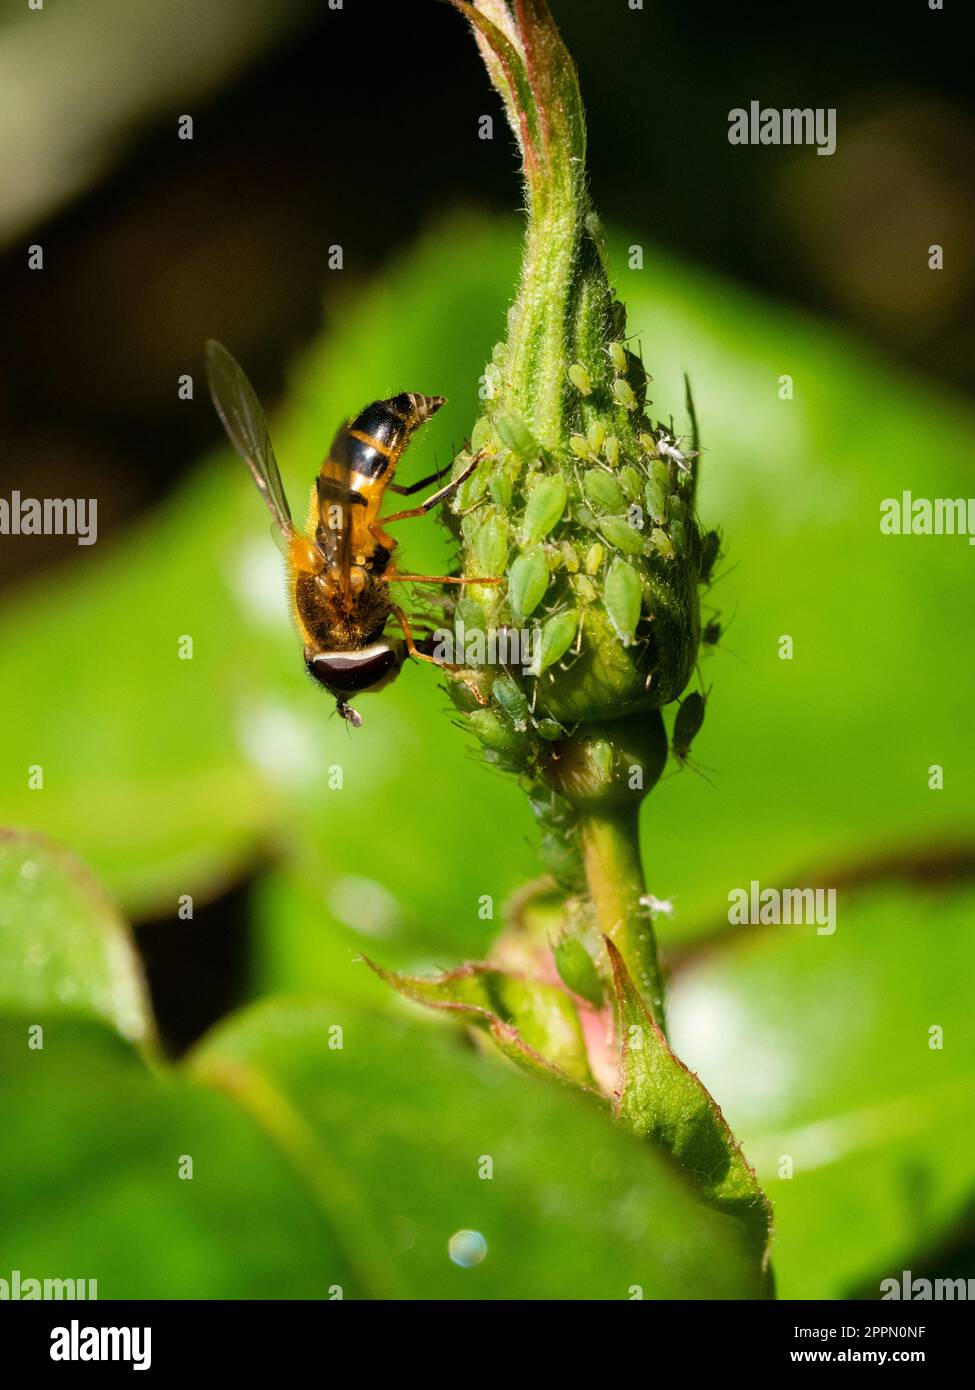 Adult female of the UK hoverfly species, Epistrophe eligans, feeding on honeydew from green rose aphids Stock Photo